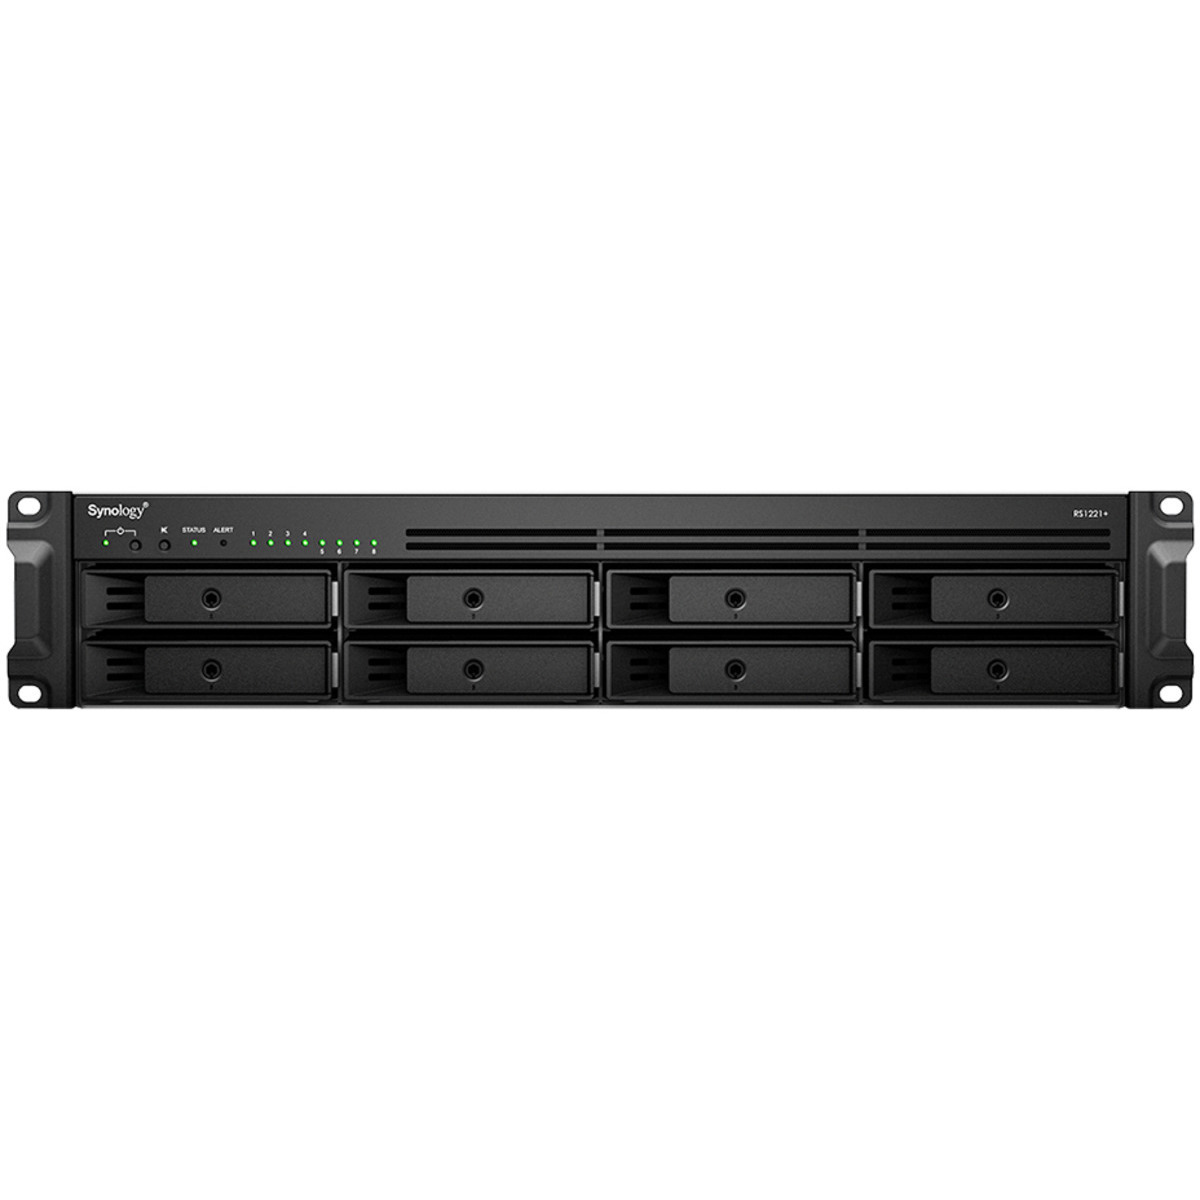 Synology RackStation RS1221+ 24tb 8-Bay RackMount Multimedia / Power User / Business NAS - Network Attached Storage Device 4x6tb Western Digital Gold WD6003FRYZ 3.5 7200rpm SATA 6Gb/s HDD ENTERPRISE Class Drives Installed - Burn-In Tested RackStation RS1221+